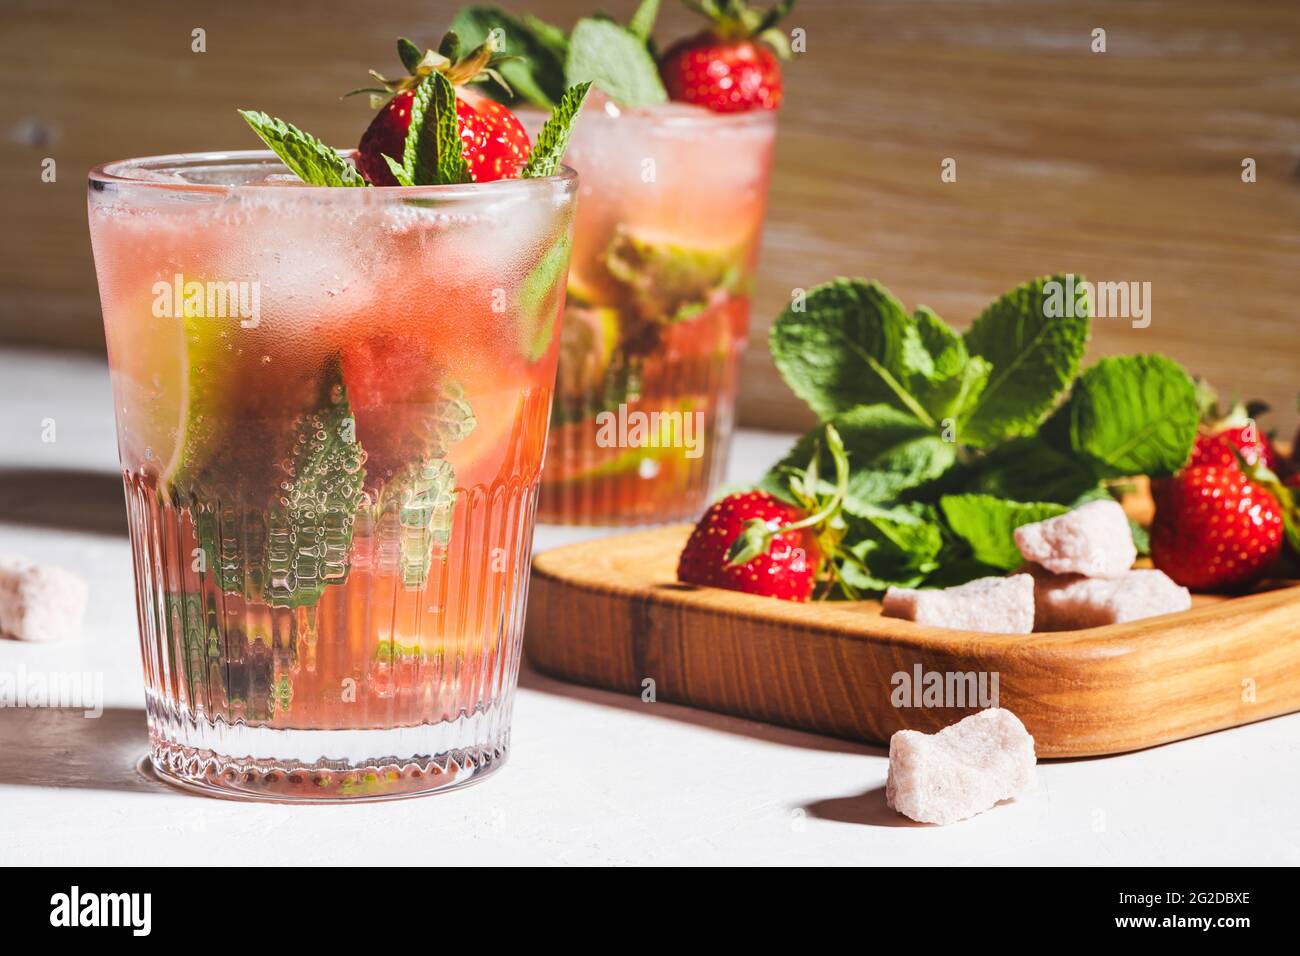 Refreshing summer drink caipirinha cocktail with strawberries and fresh mint in glasses, hard light with shadows Stock Photo